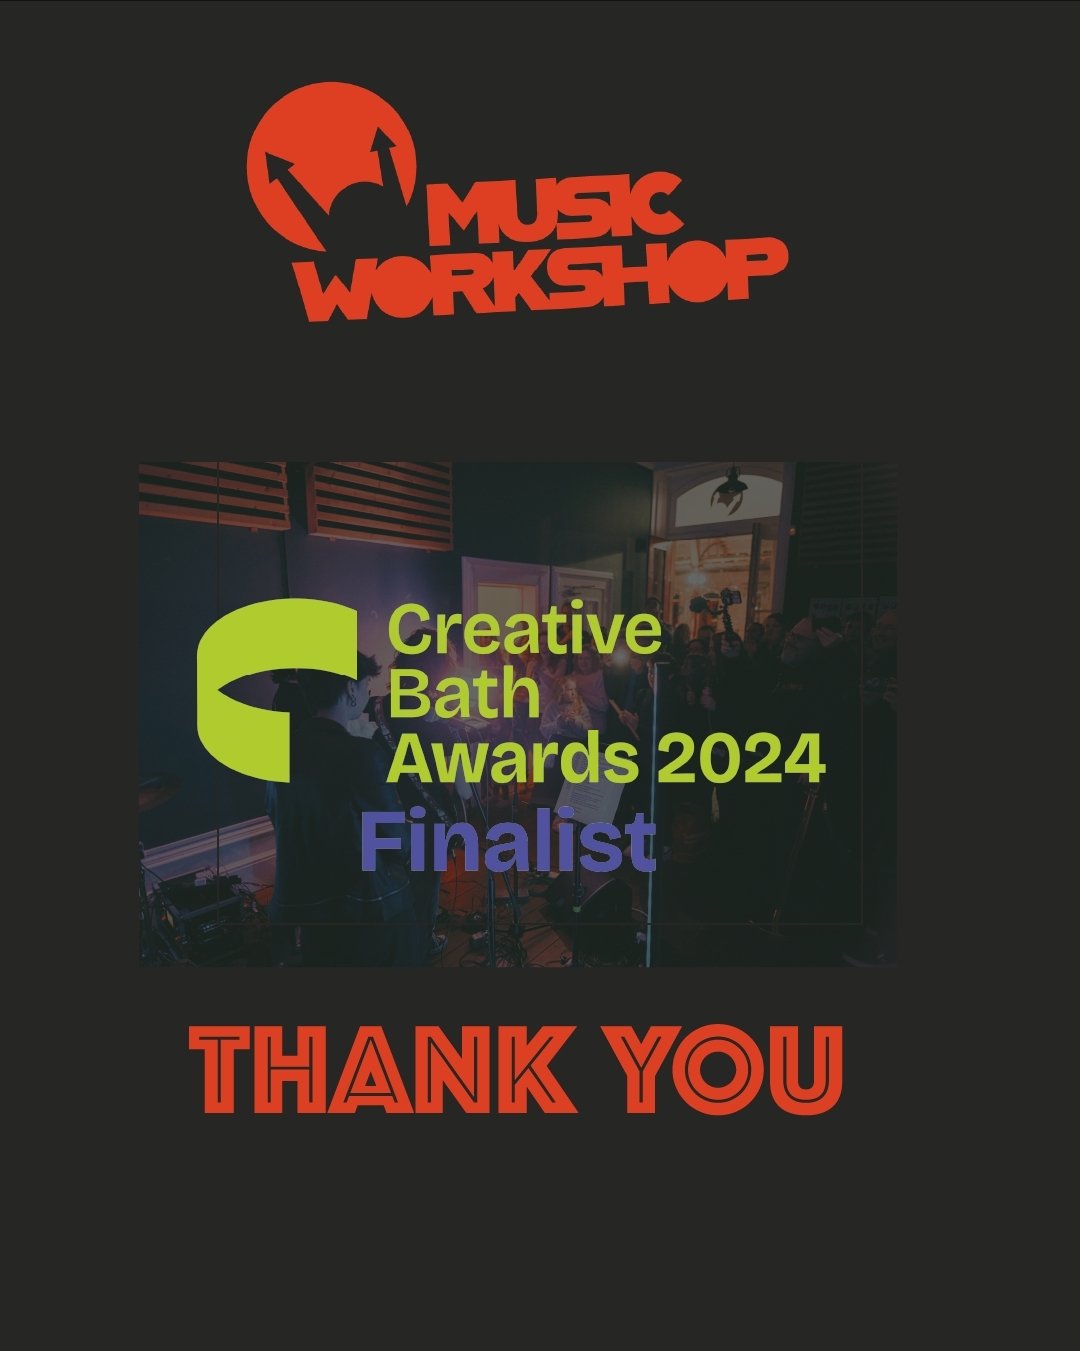 Thank you to those who selected us as finalists for the @creativebath Awards 2024 in the Performing Arts &amp; Music Category. Some things we have been up to this past year have made it quite an incredible 12 months that's led us here. Non would have